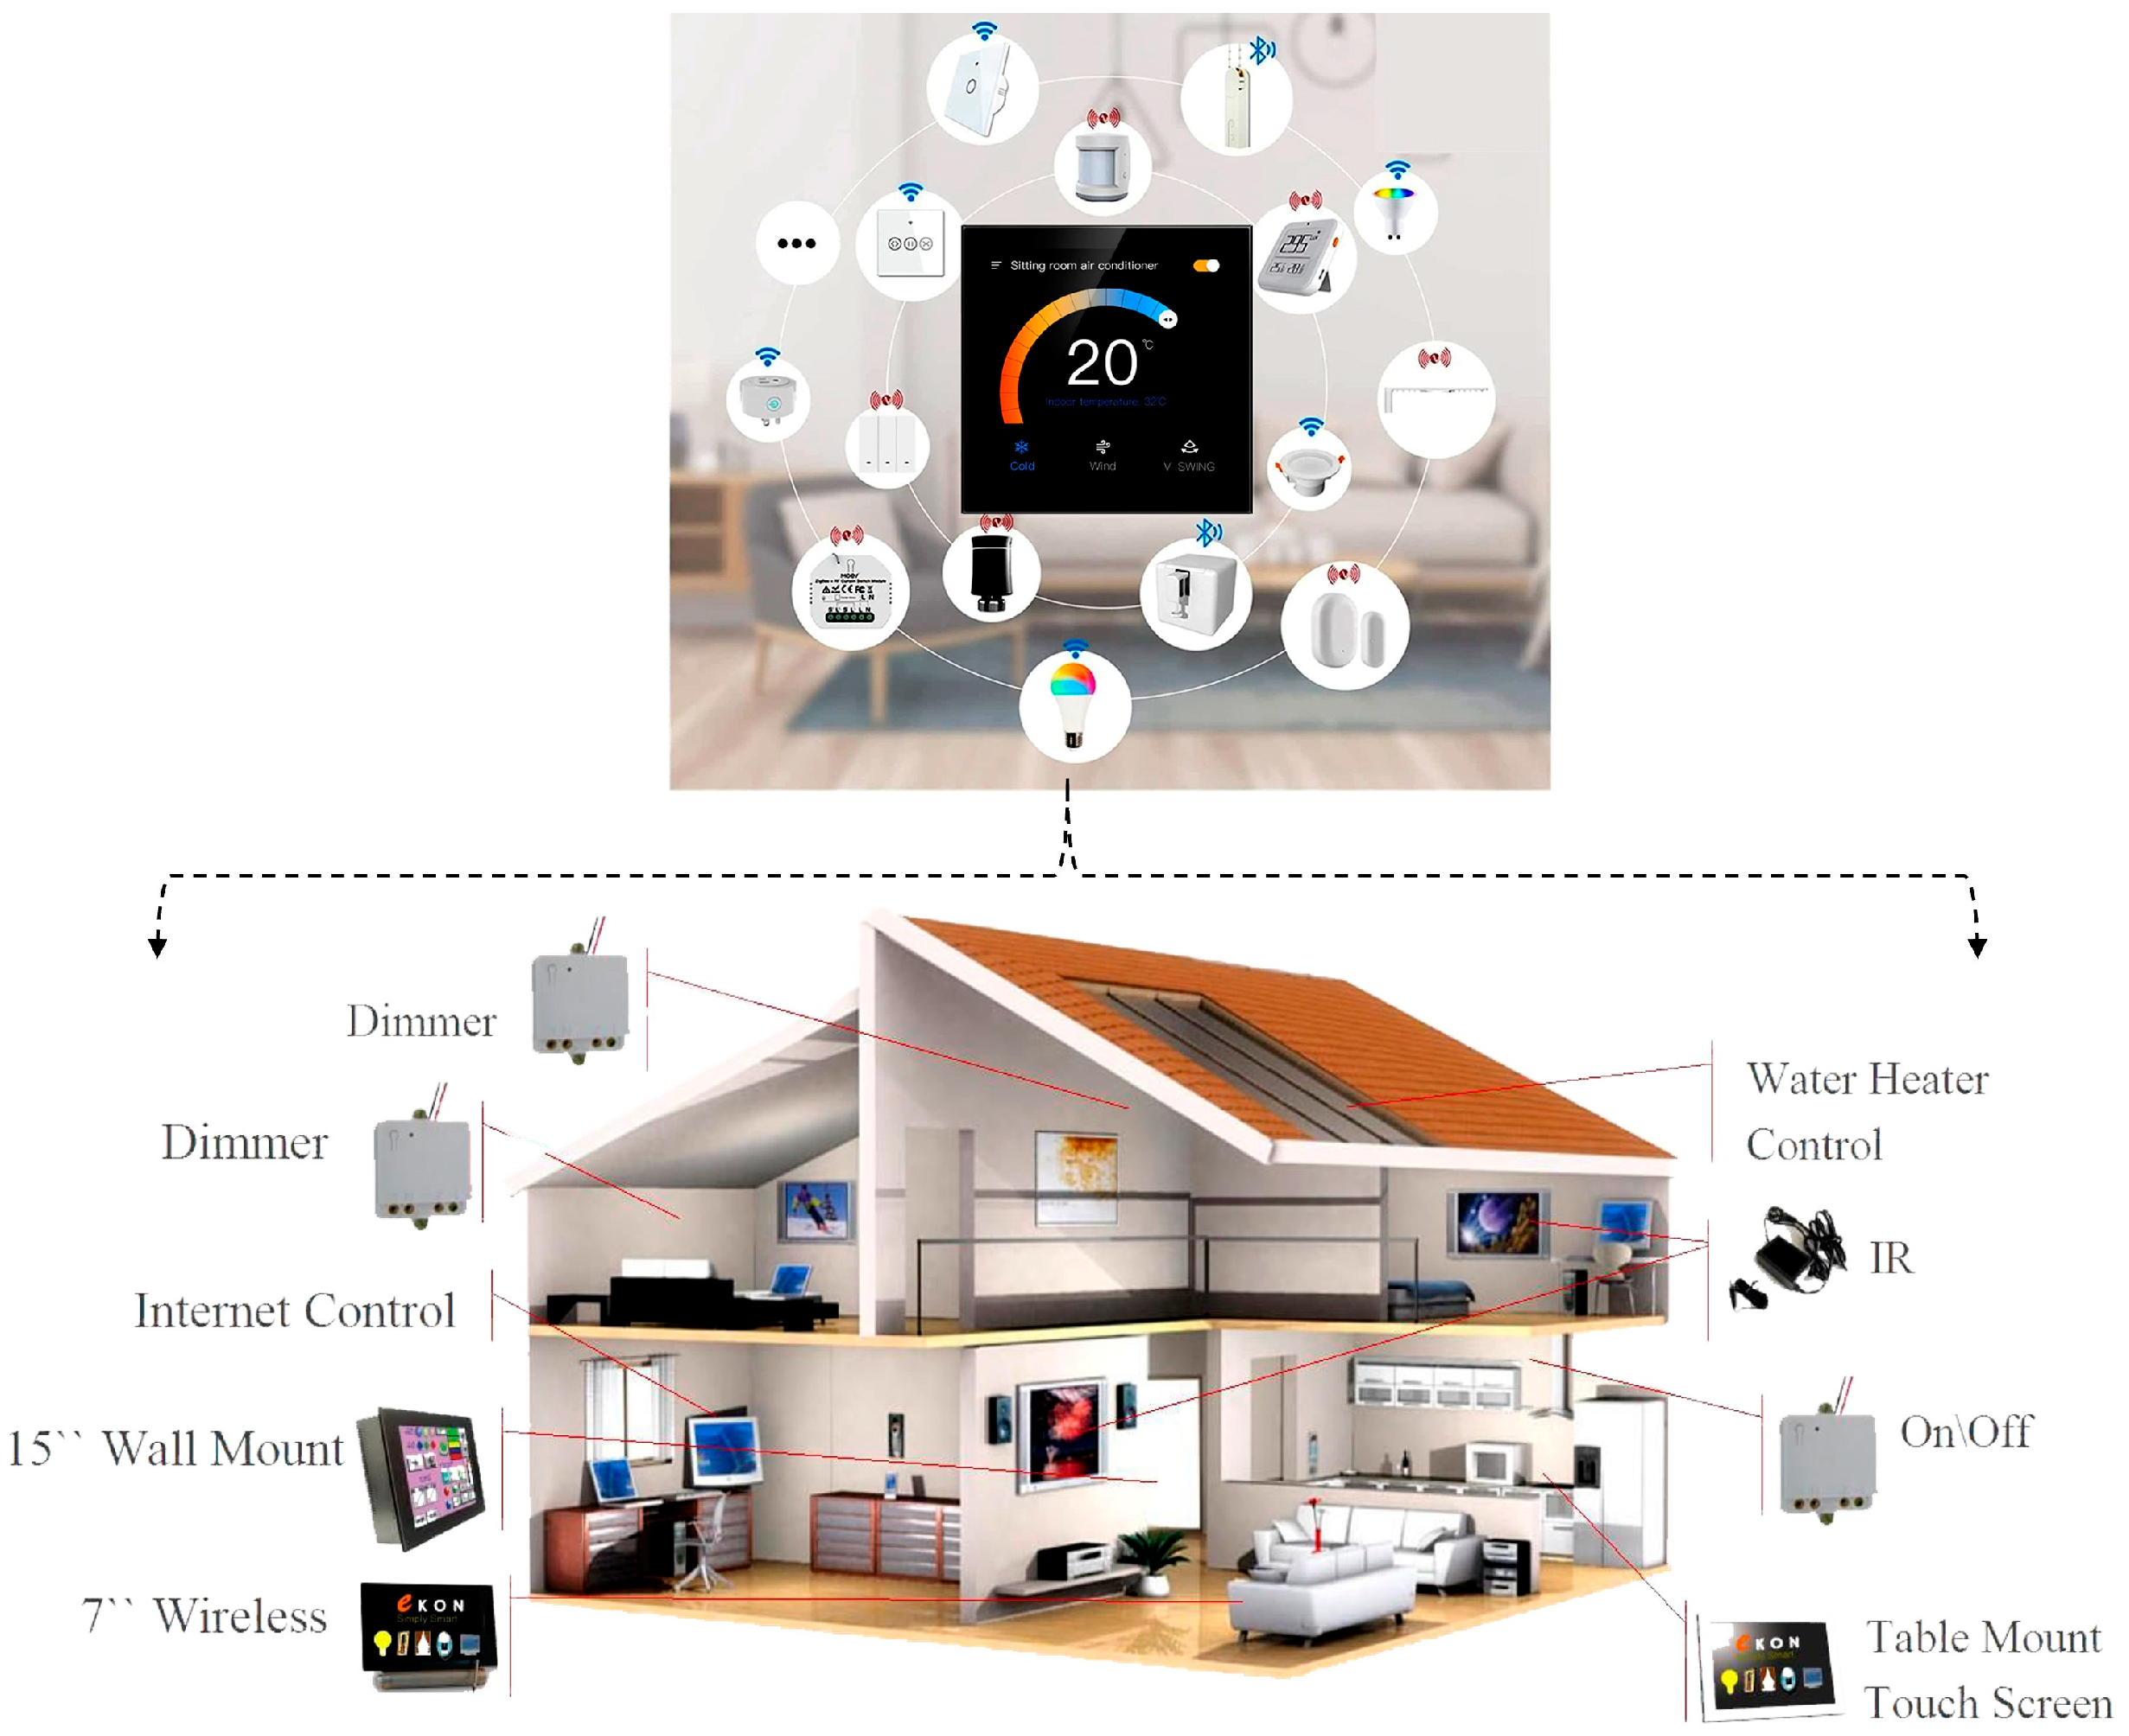 Smart Appliances in the Smart Home - Silicon Labs